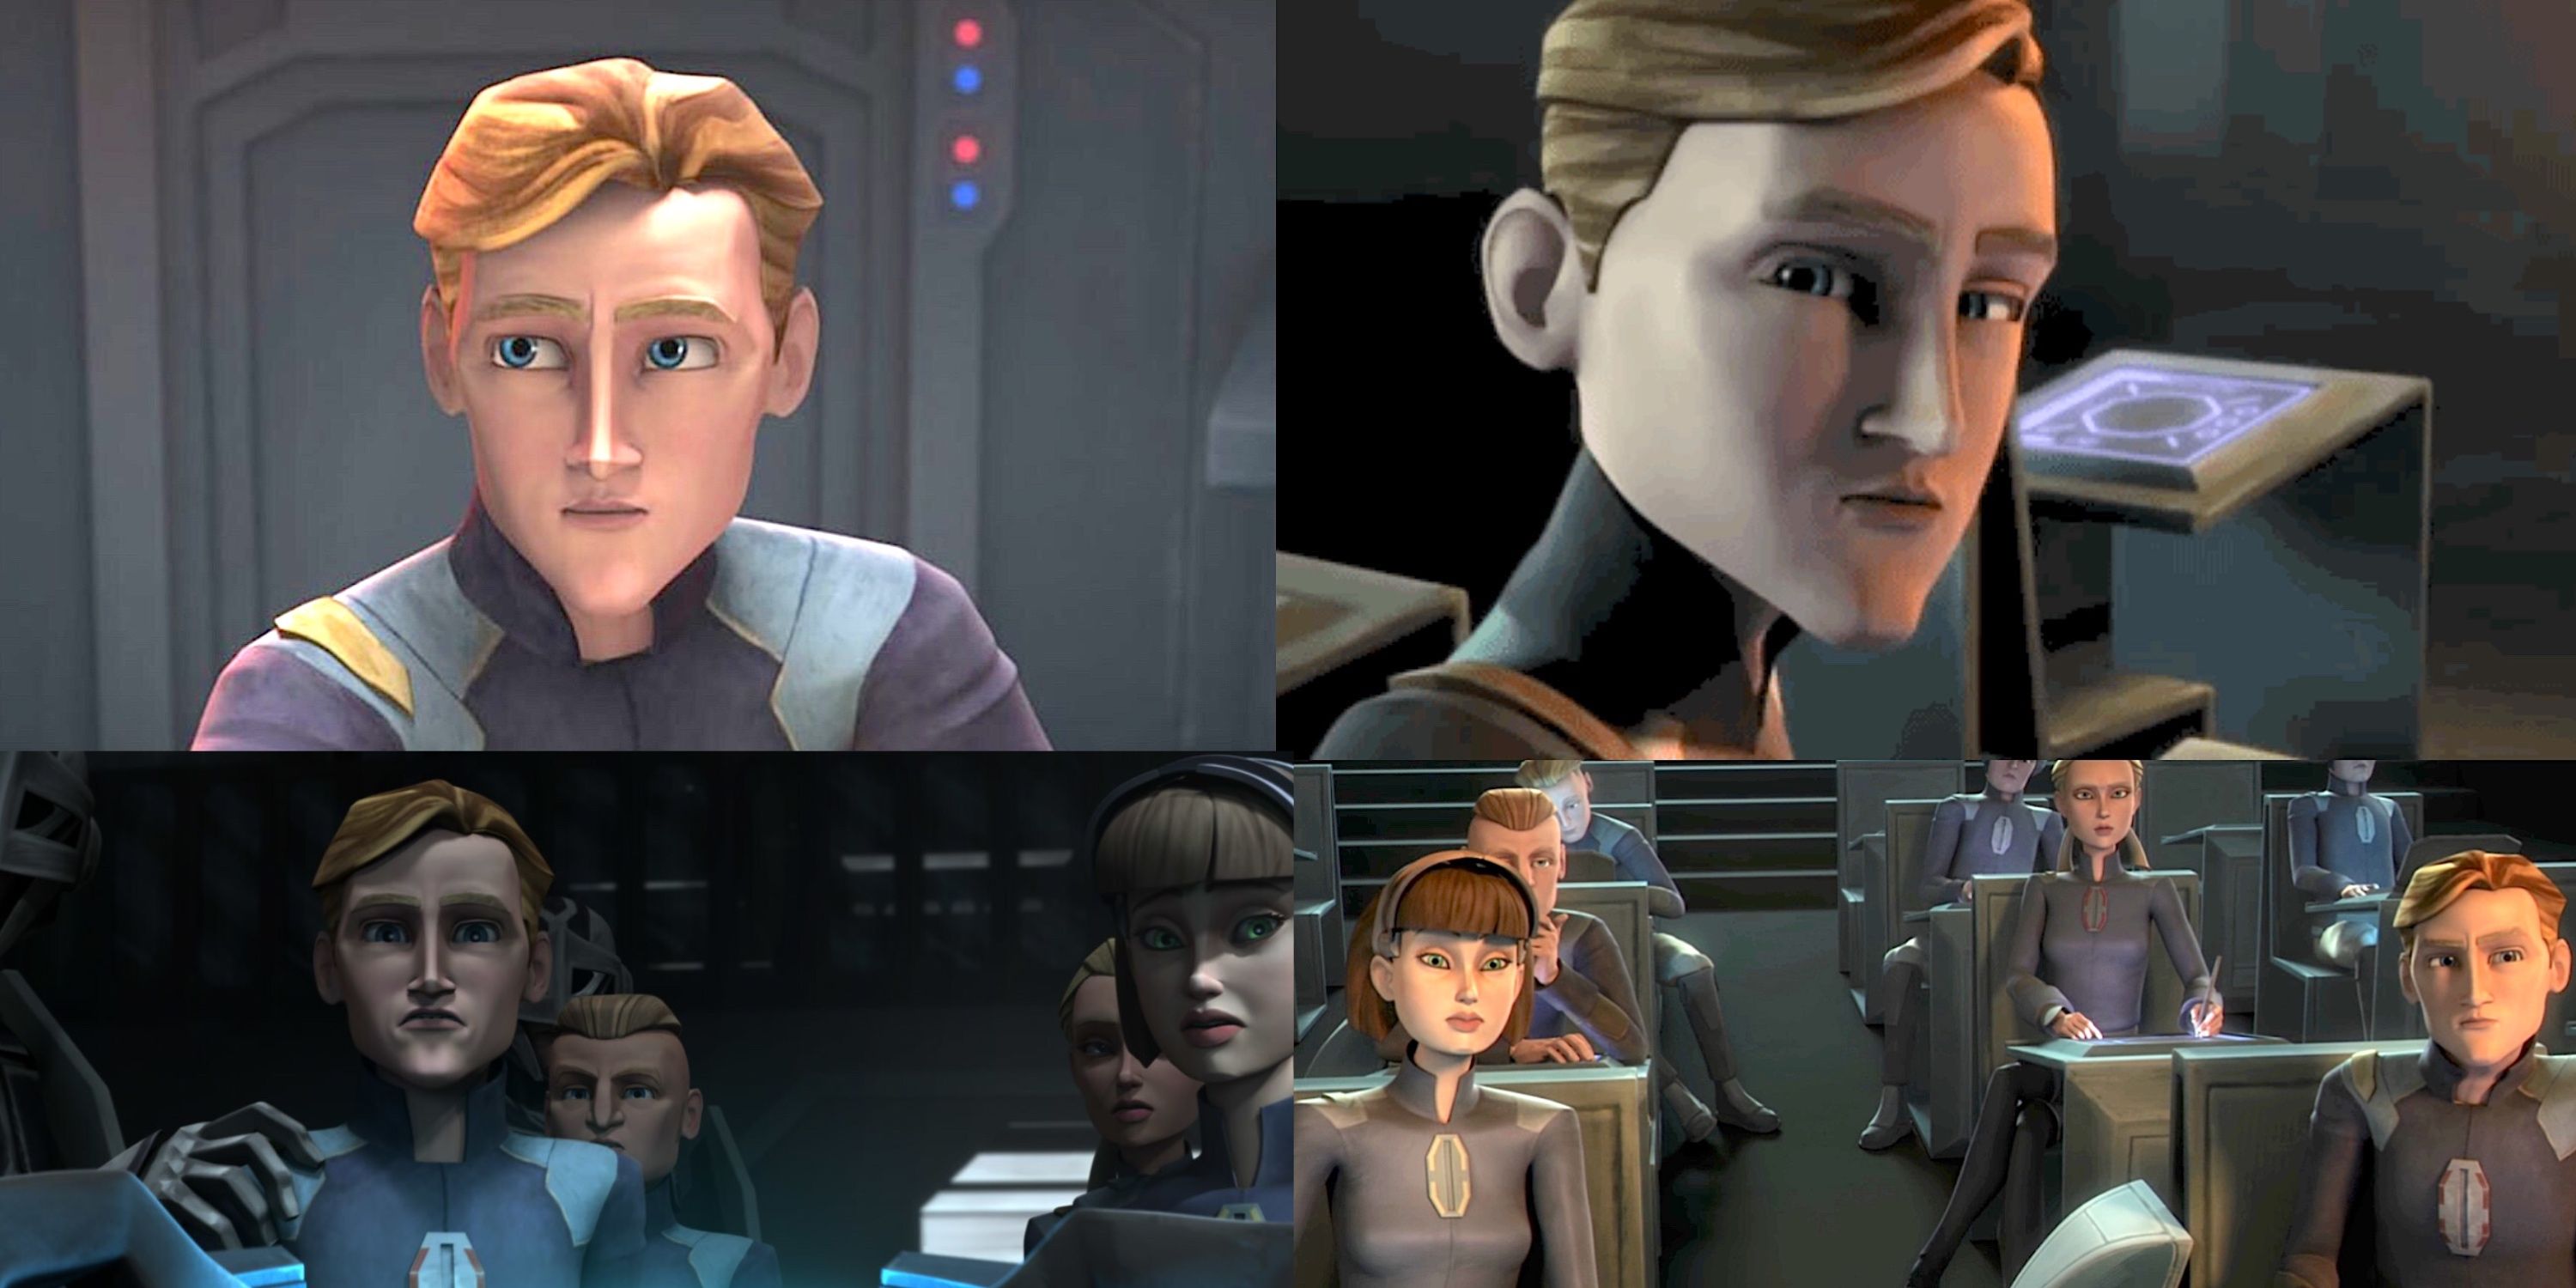 nScreenshots of Korkie Kryze from the clone wars episode "The academy"